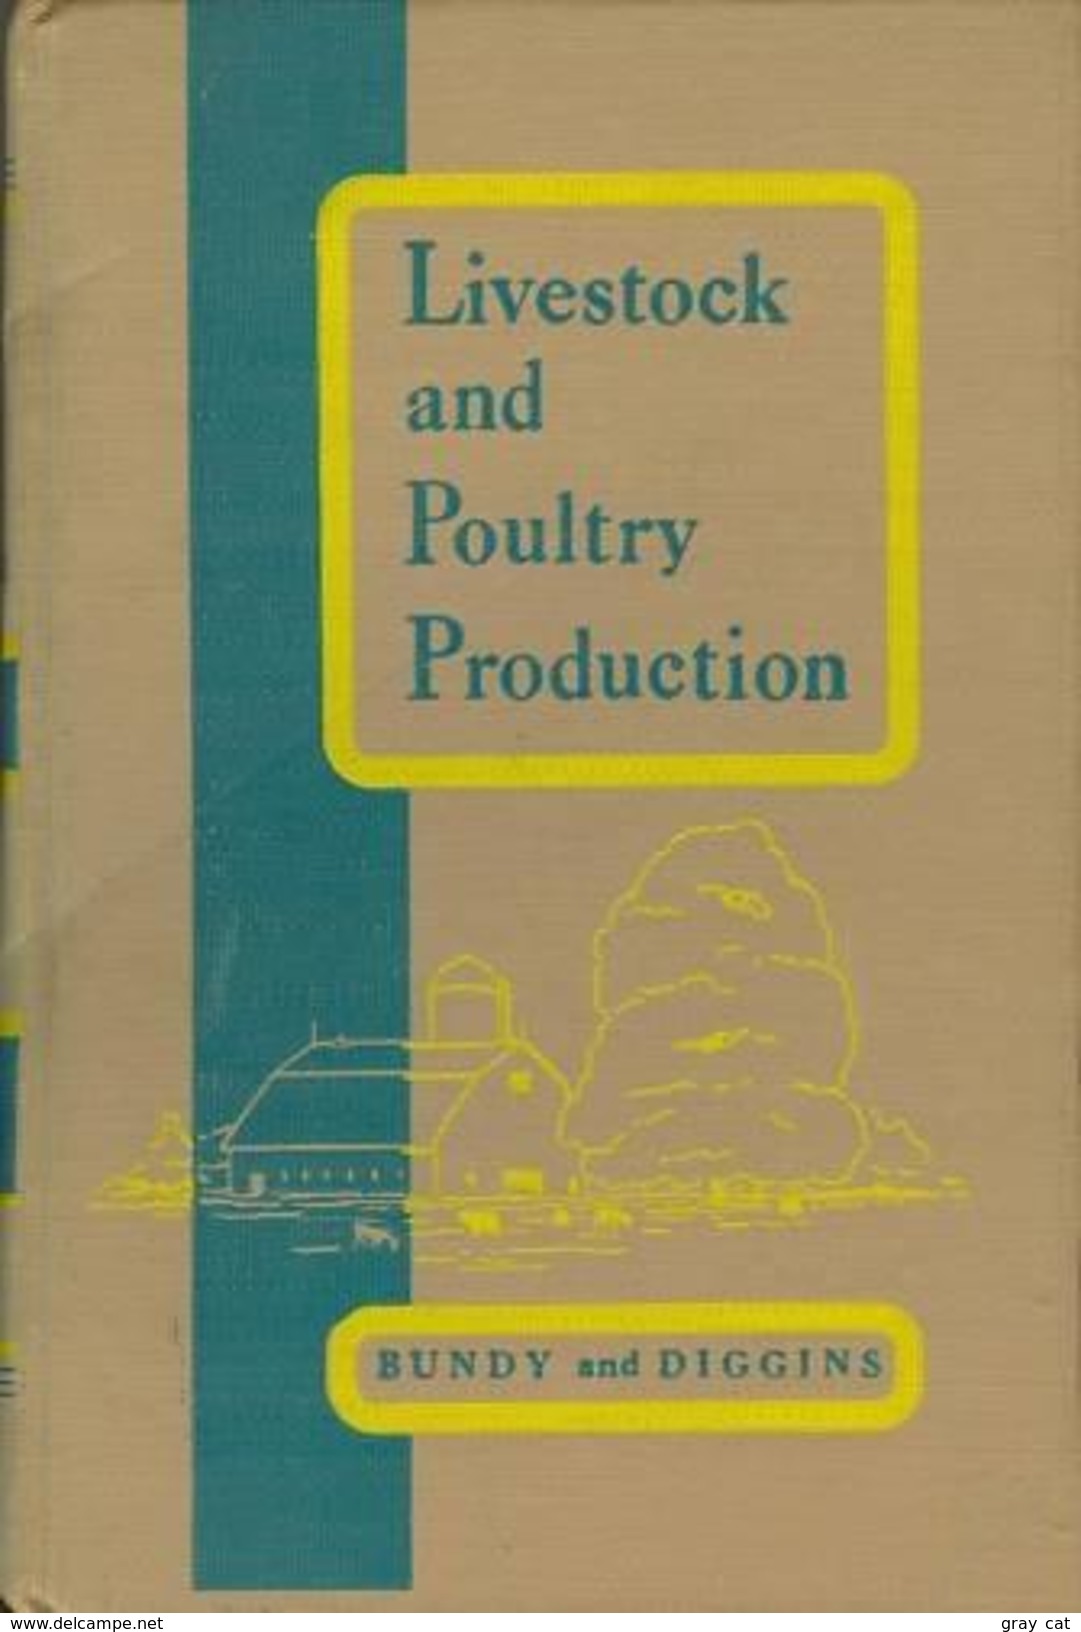 Livestock And Poultry Production: Principles And Practices By Clarence E. Bundy & Ronald V. Diggins - 1950-Maintenant